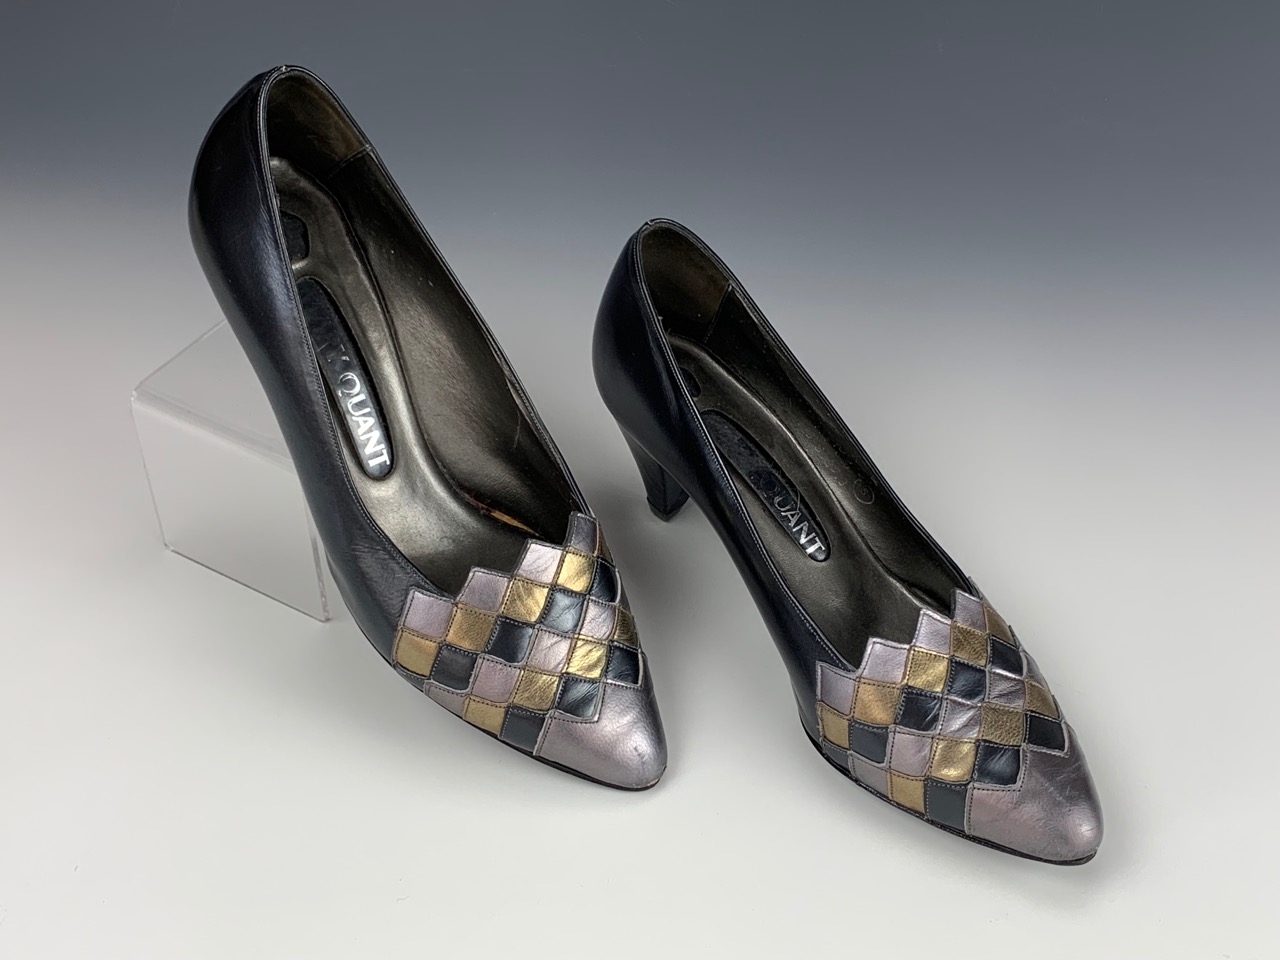 A 1980s pair of Mary Quant court shoes, in navy blue with a metallic diaper pattern toe,